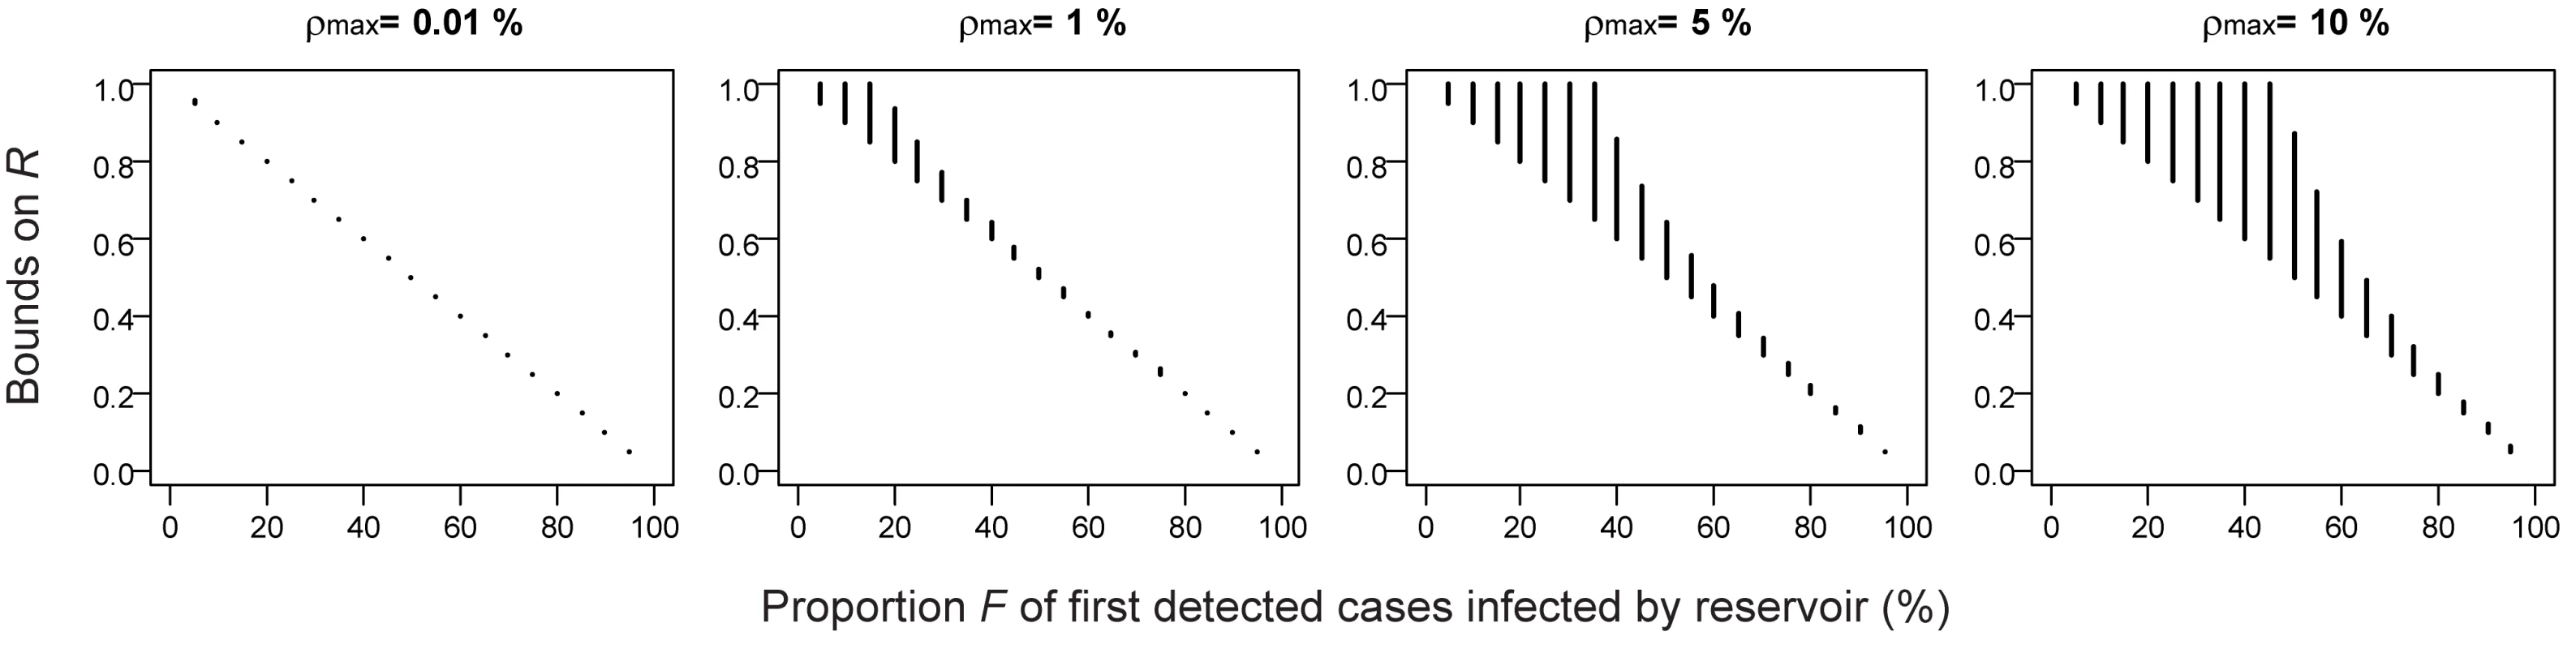 Impact of uncertainty on the case detection rate and the overdispersion parameter on estimates of the reproduction number R.